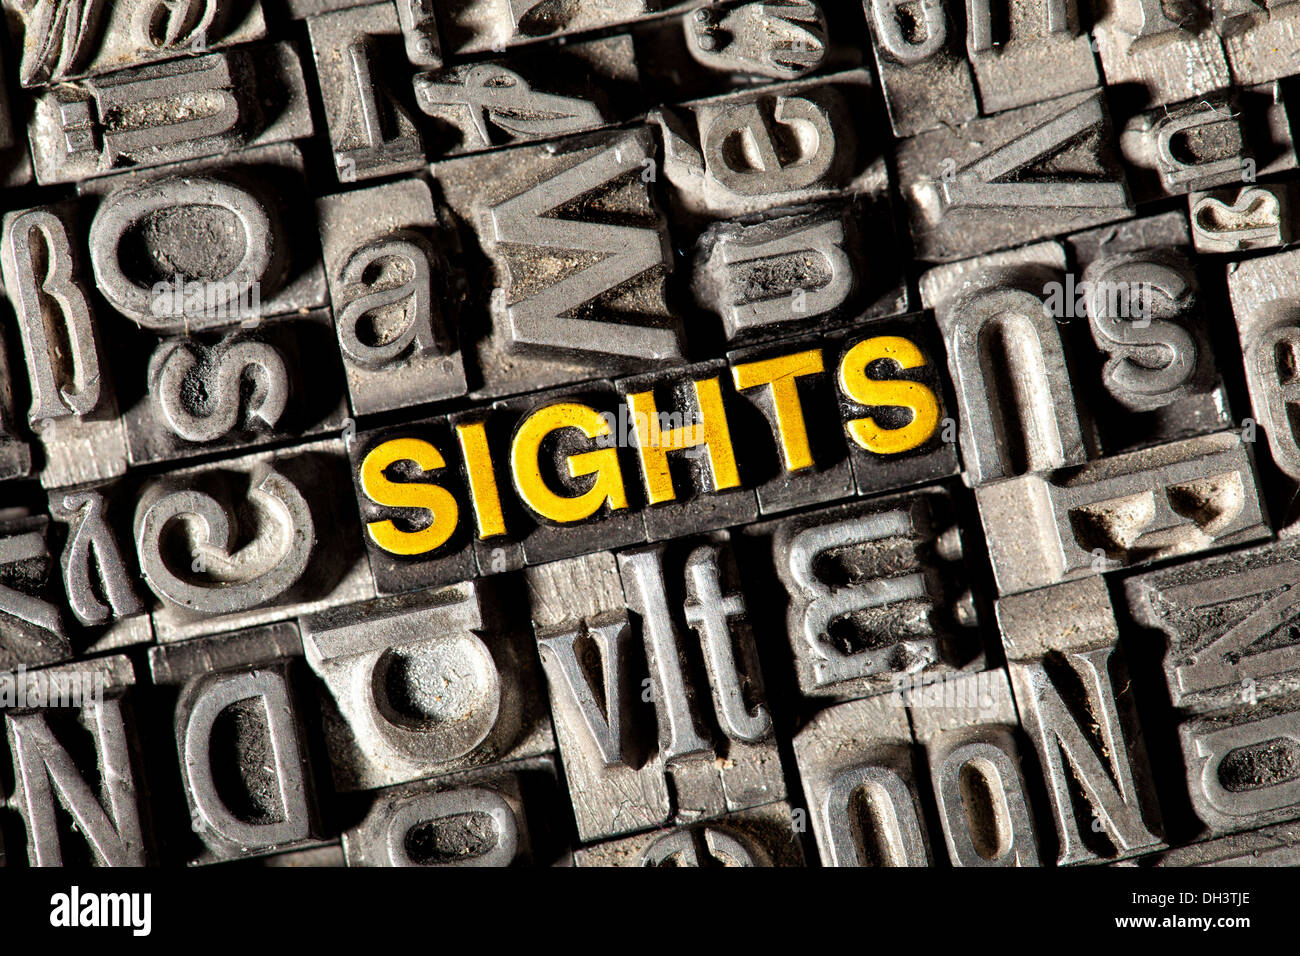 Old lead letters forming the word 'SIGHTS' Stock Photo